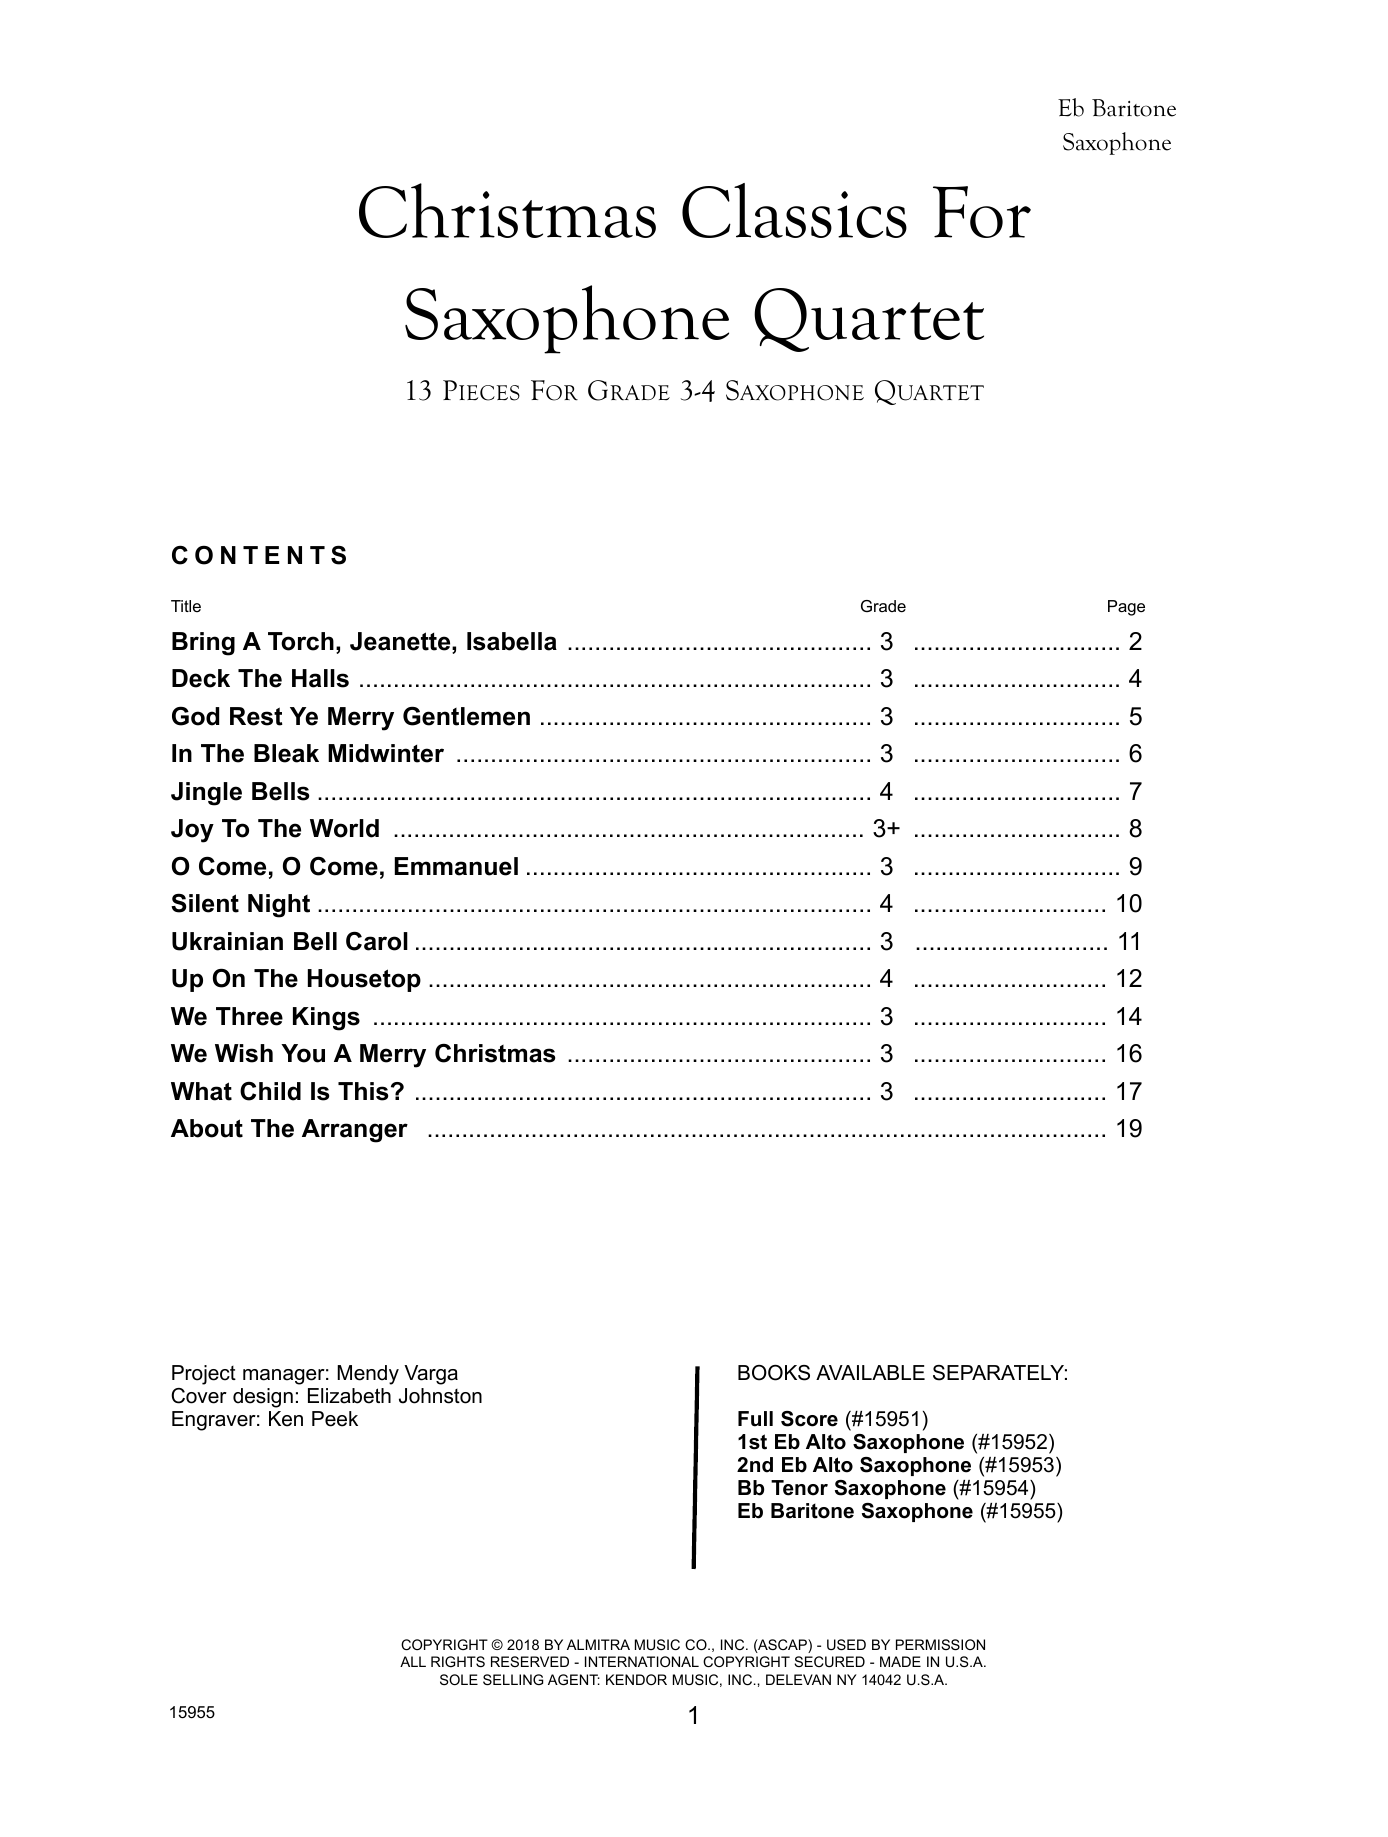 Frank J. Halferty Christmas Classics For Saxophone Quartet - Eb Baritone Saxophone sheet music preview music notes and score for Woodwind Ensemble including 18 page(s)